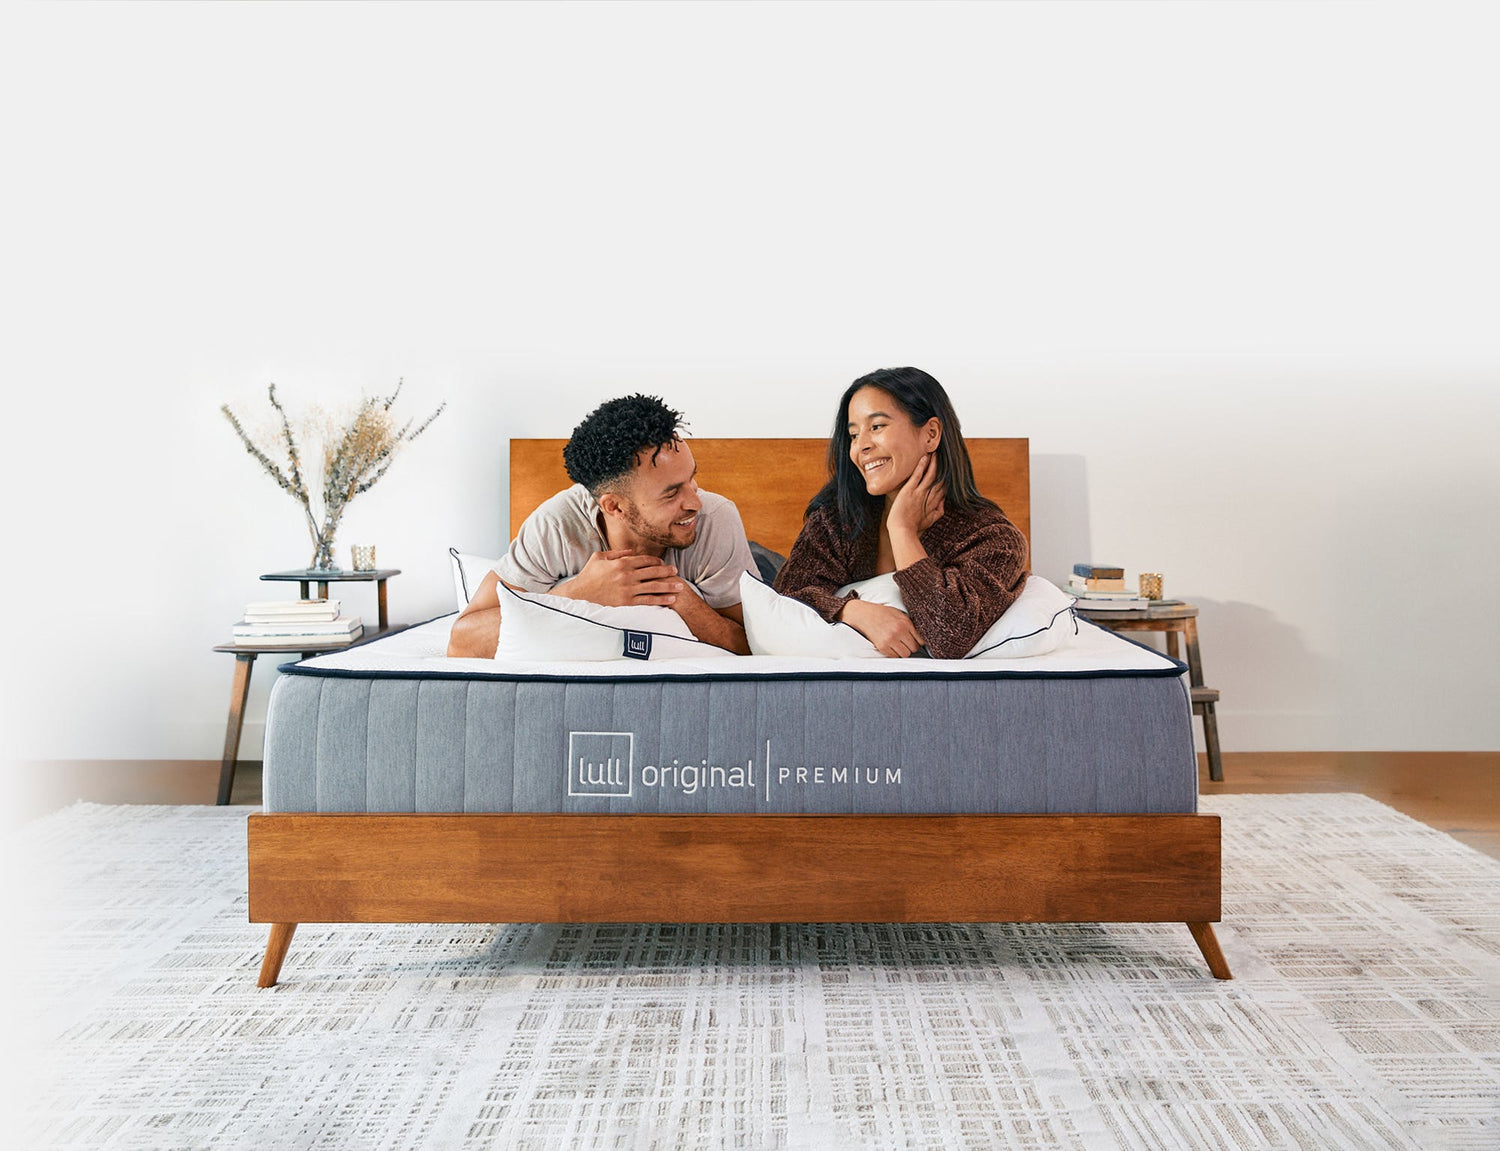 A couple lying down on a lull mattress smiling at each other.